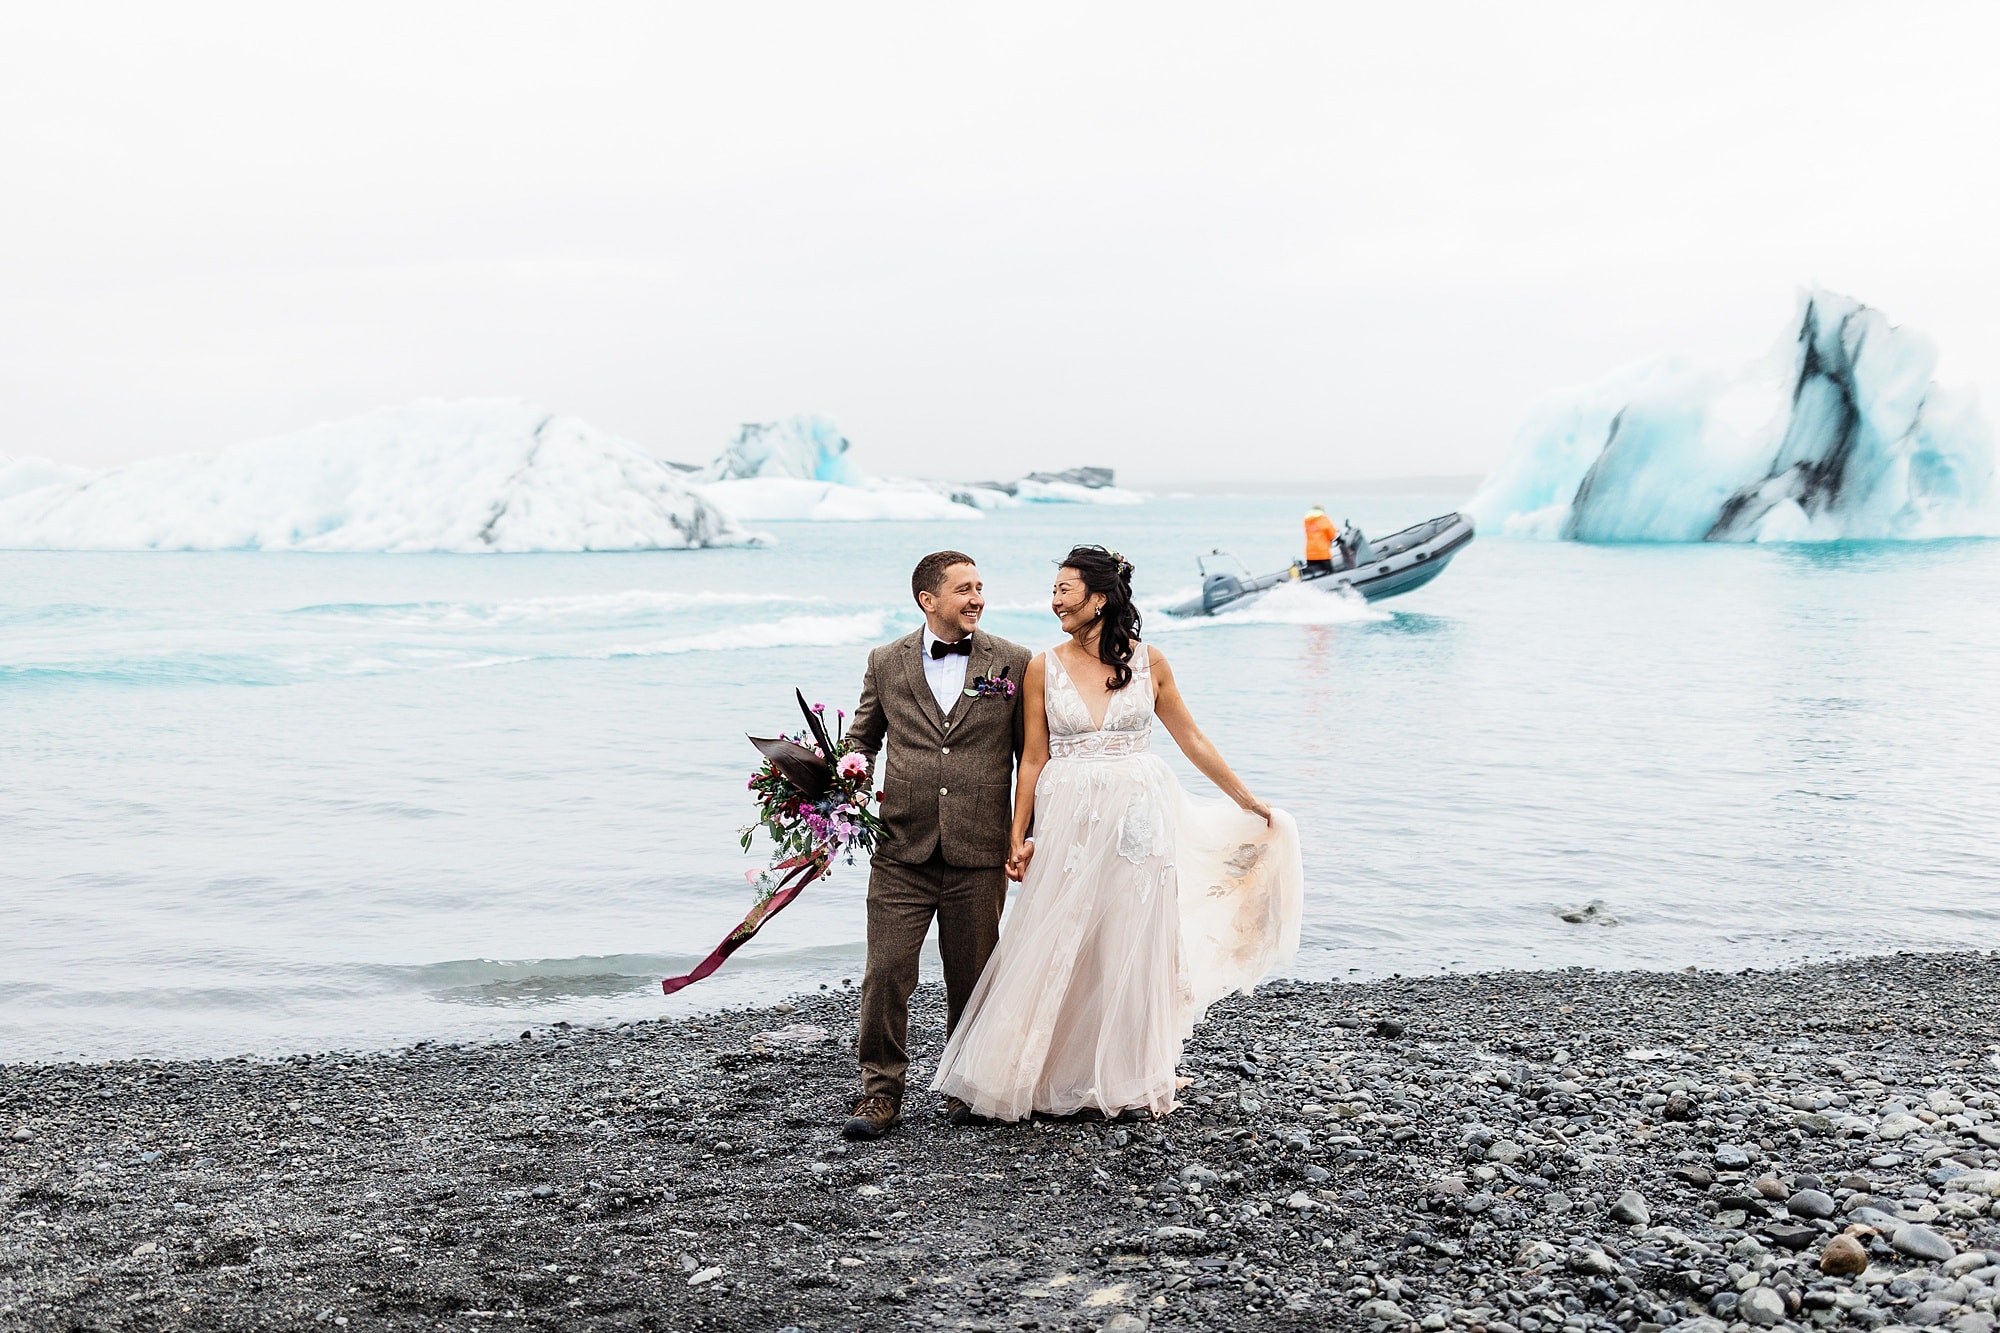 A bride and groom admire one another at Diamond Beach near icebergs in Iceland